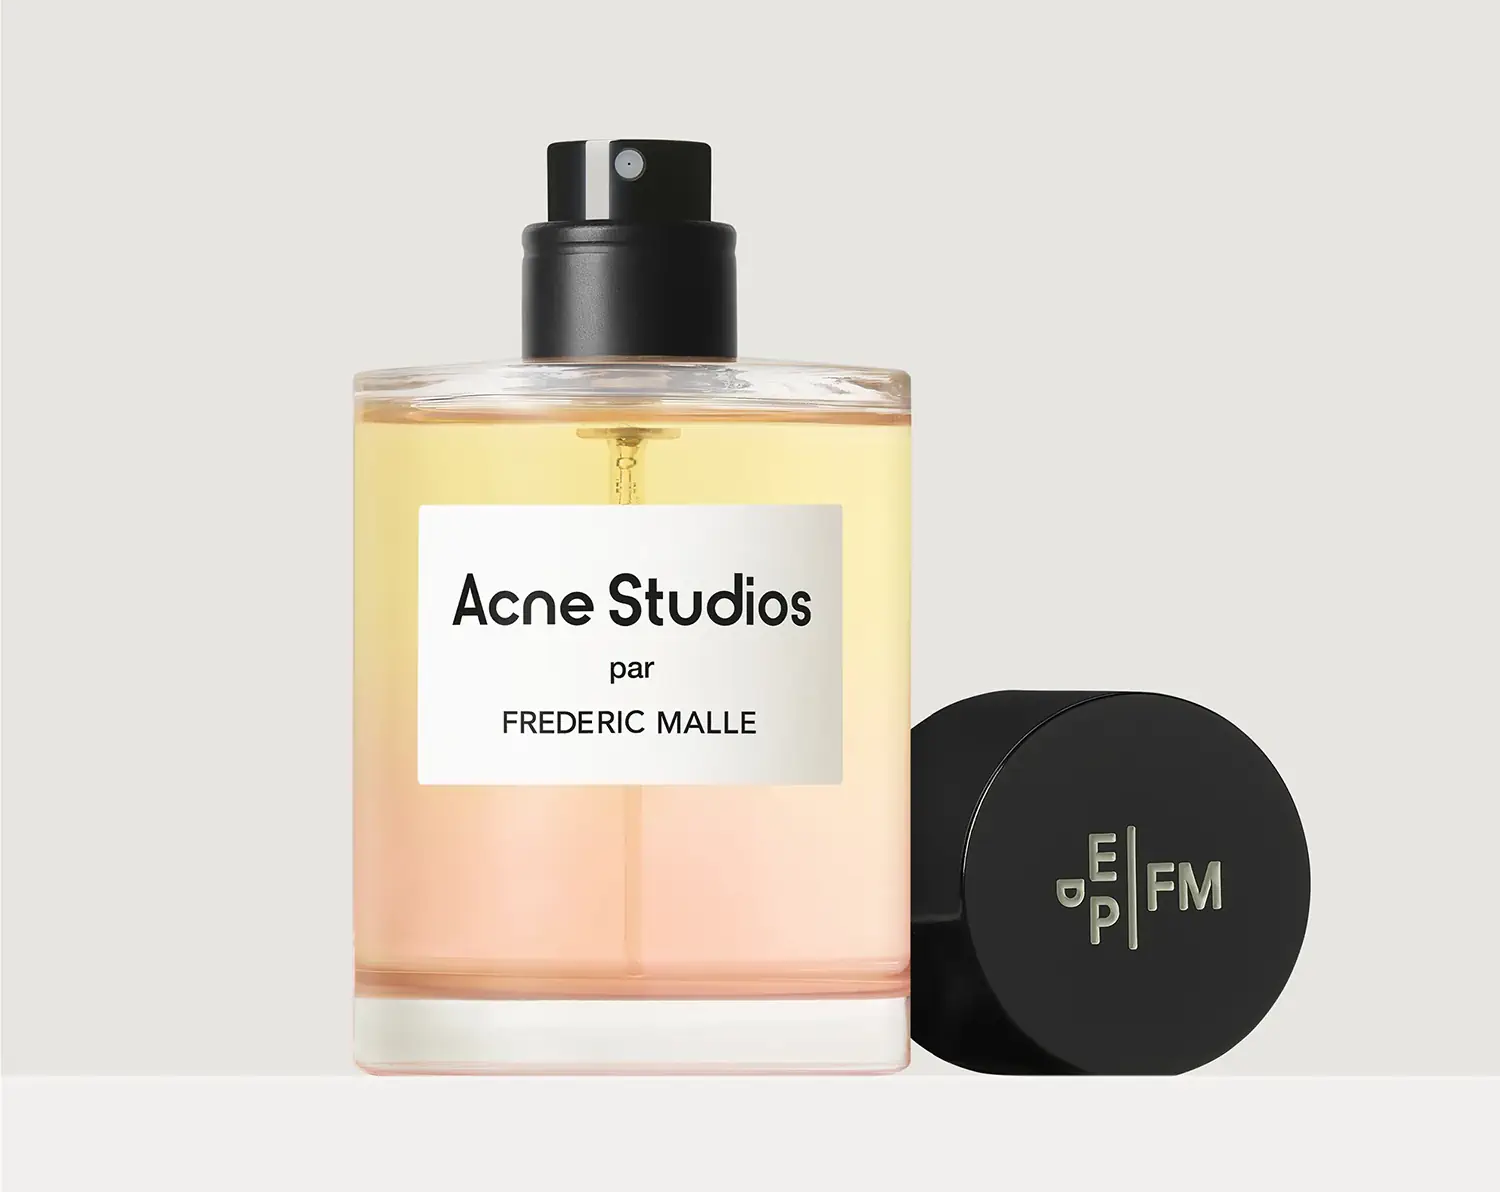 Acne Studios debuts first fragrance with Frédéric Malle